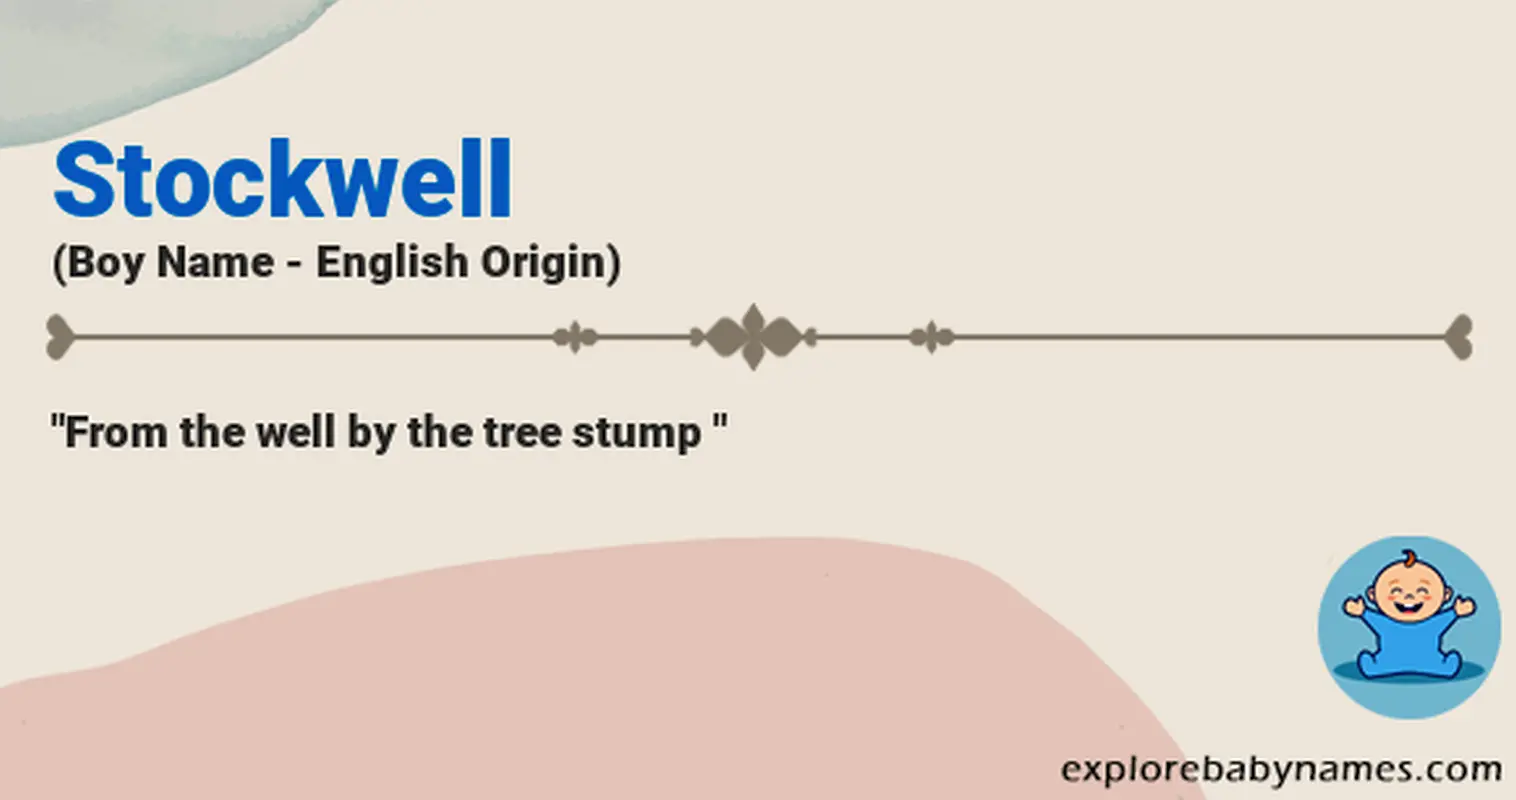 Meaning of Stockwell